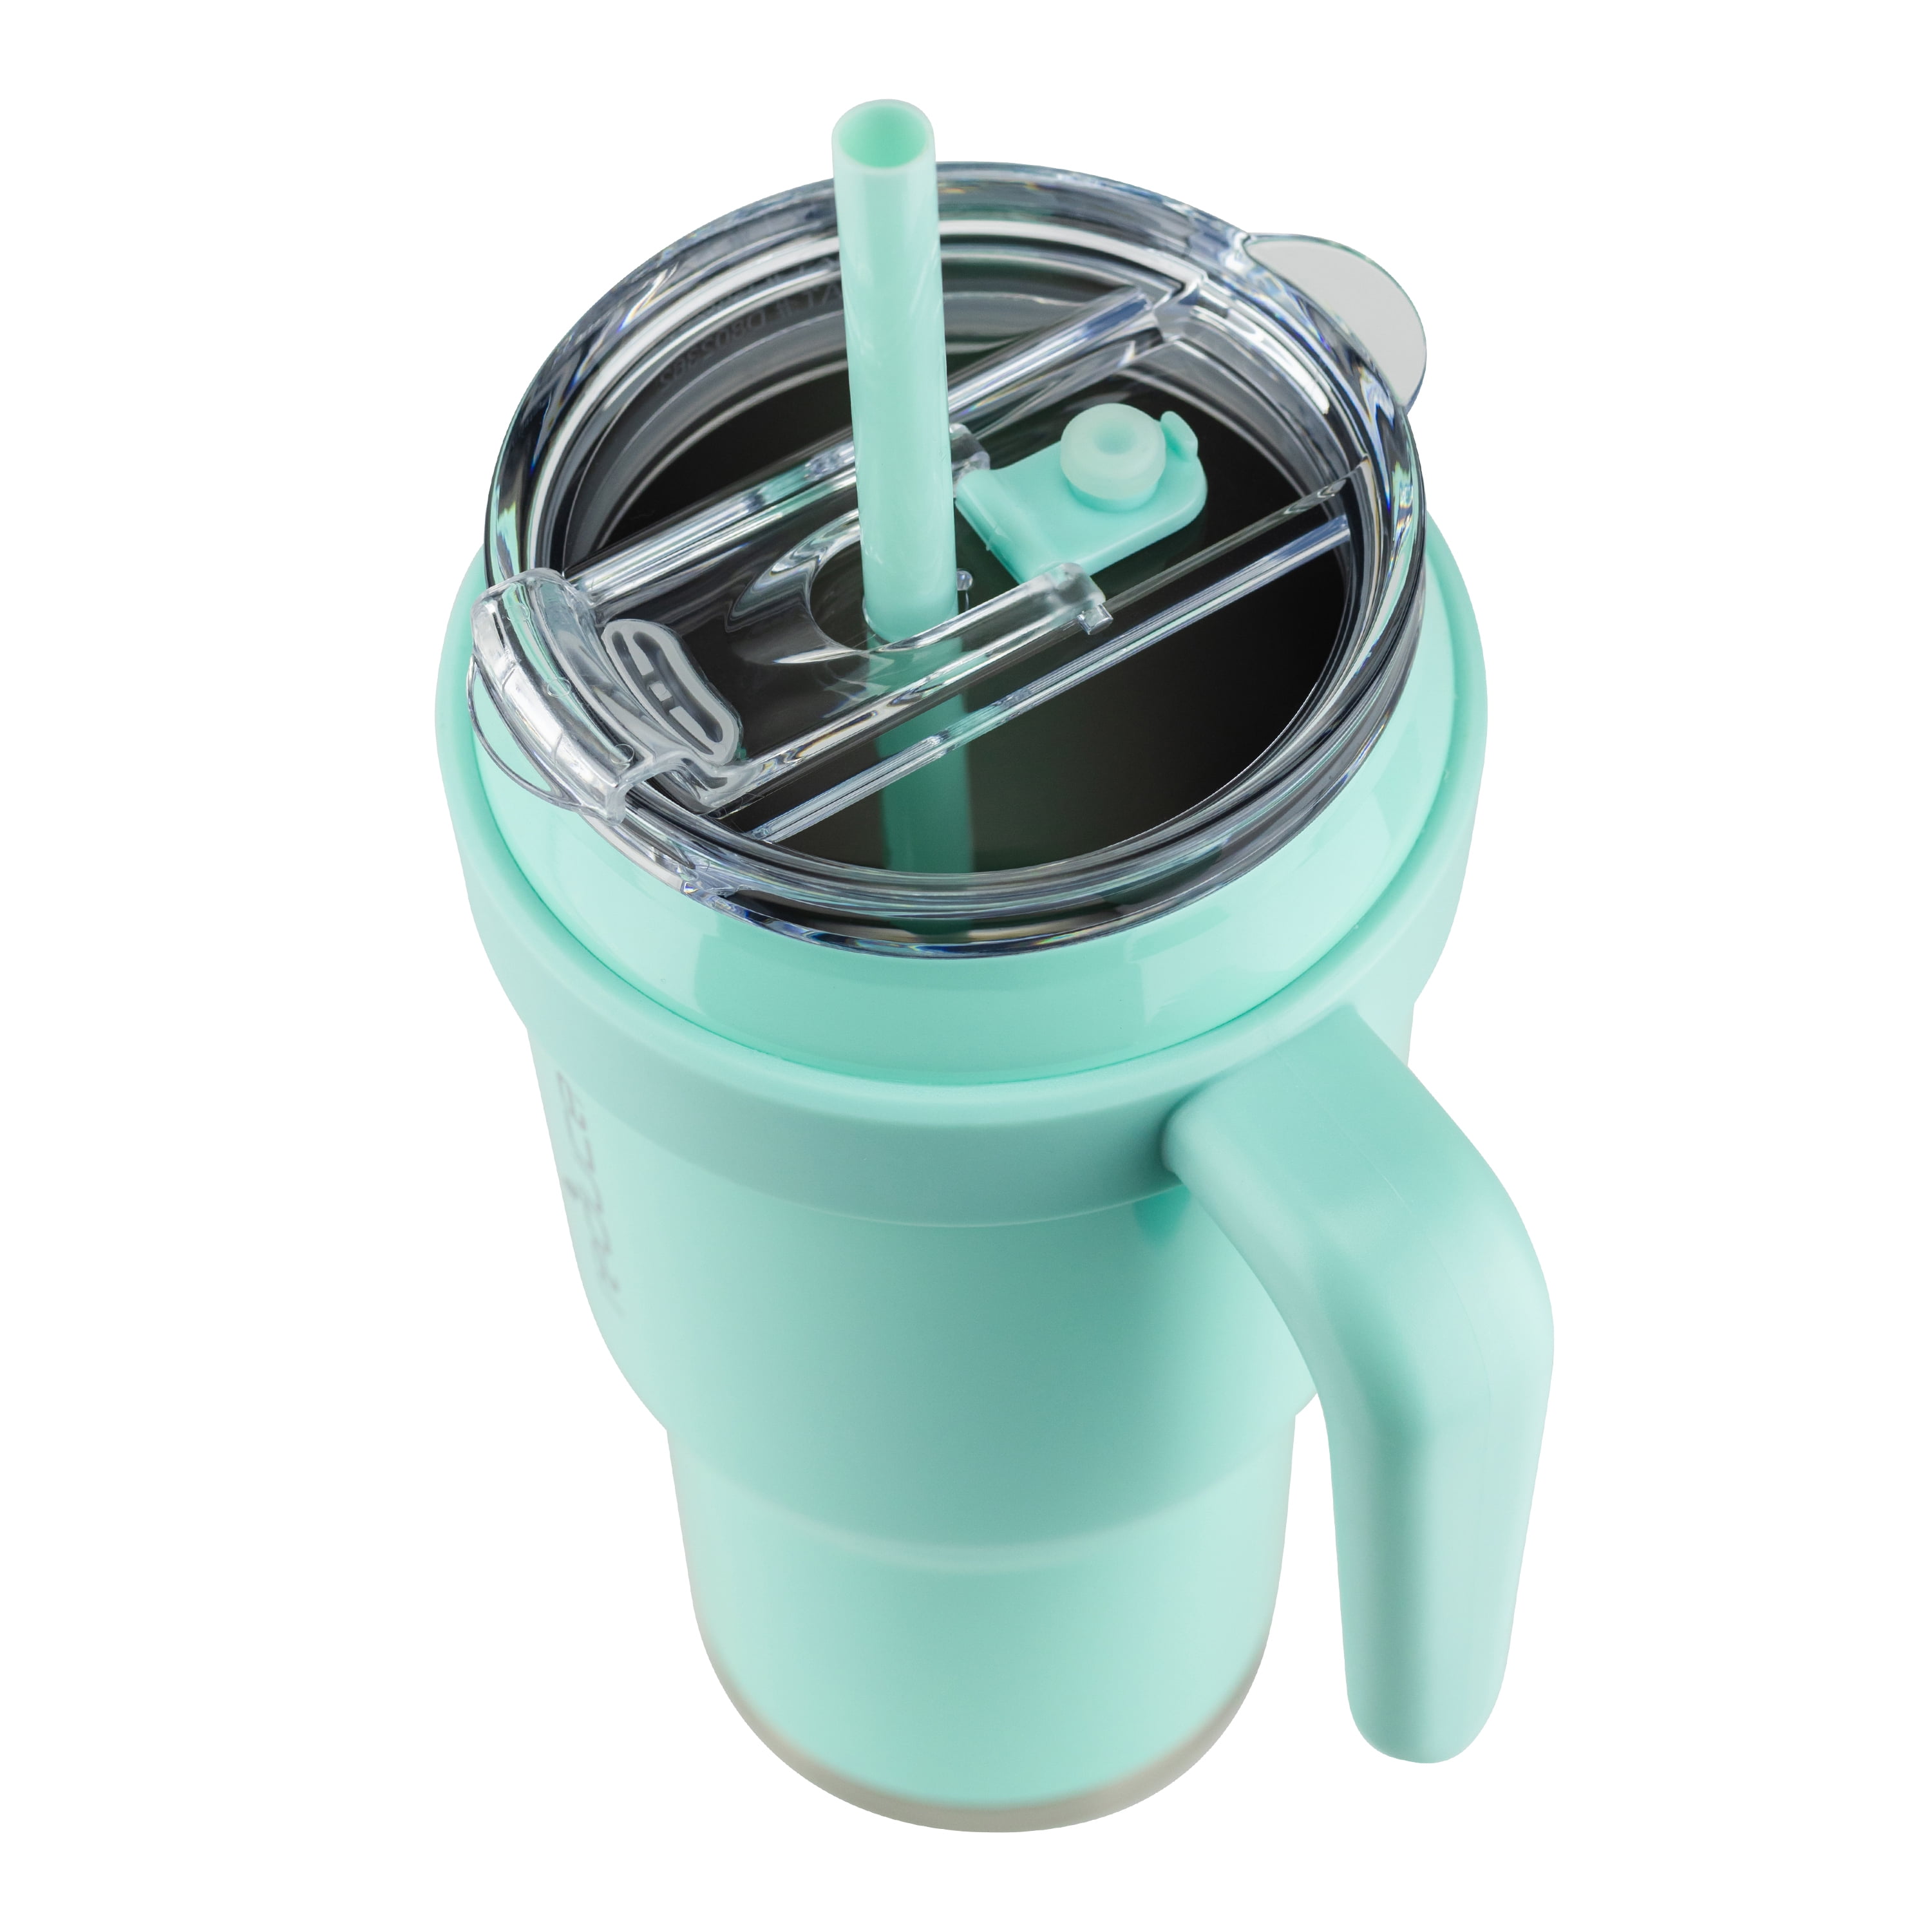 REDUCE brand Cold1 Tumblers/Mugs and other 14-18oz mouth  Replacement Lid (3.0 inch diameter) and Straw (8 inch) set, Clear, BPA  Free, Dishwasher safe, Durable, Reusable, Spill Proof Lid, Small: Tumblers